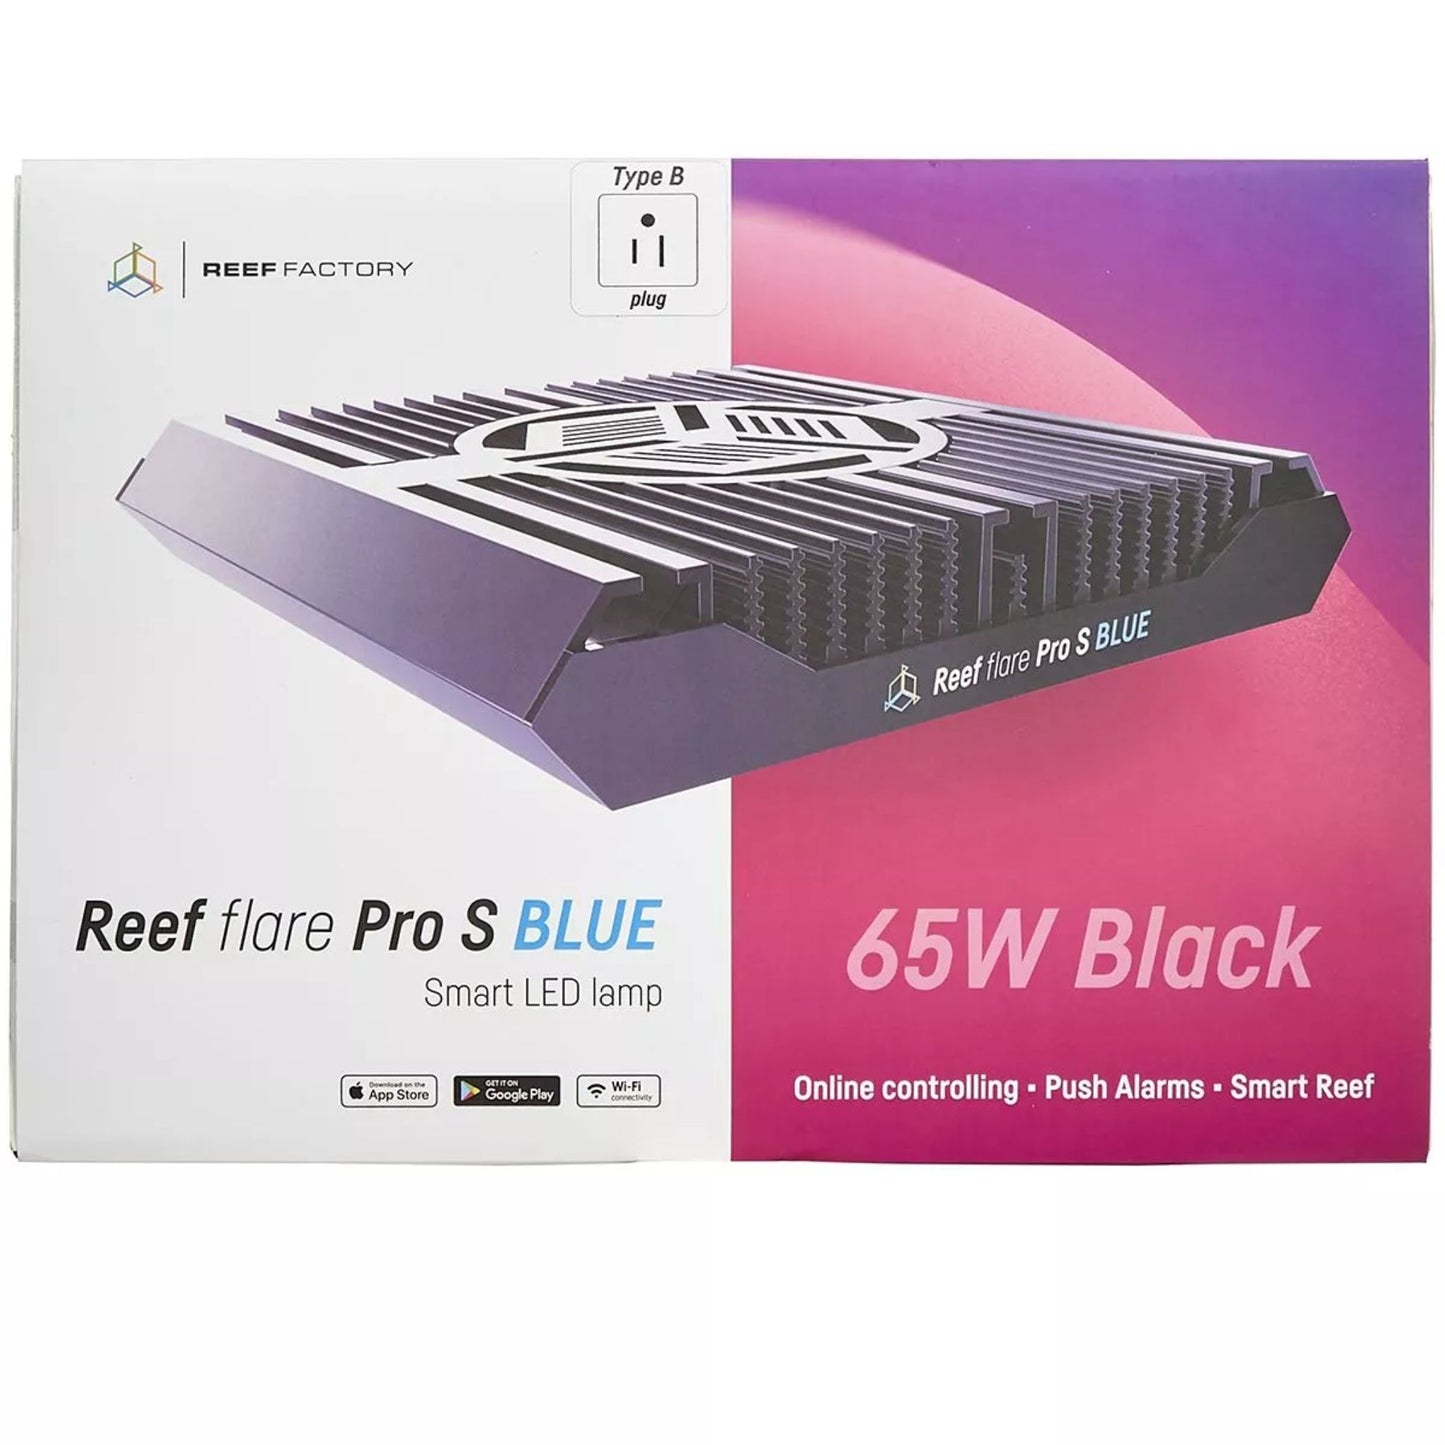 Reef Flare Pro Blue S LED Light - Reef Factory